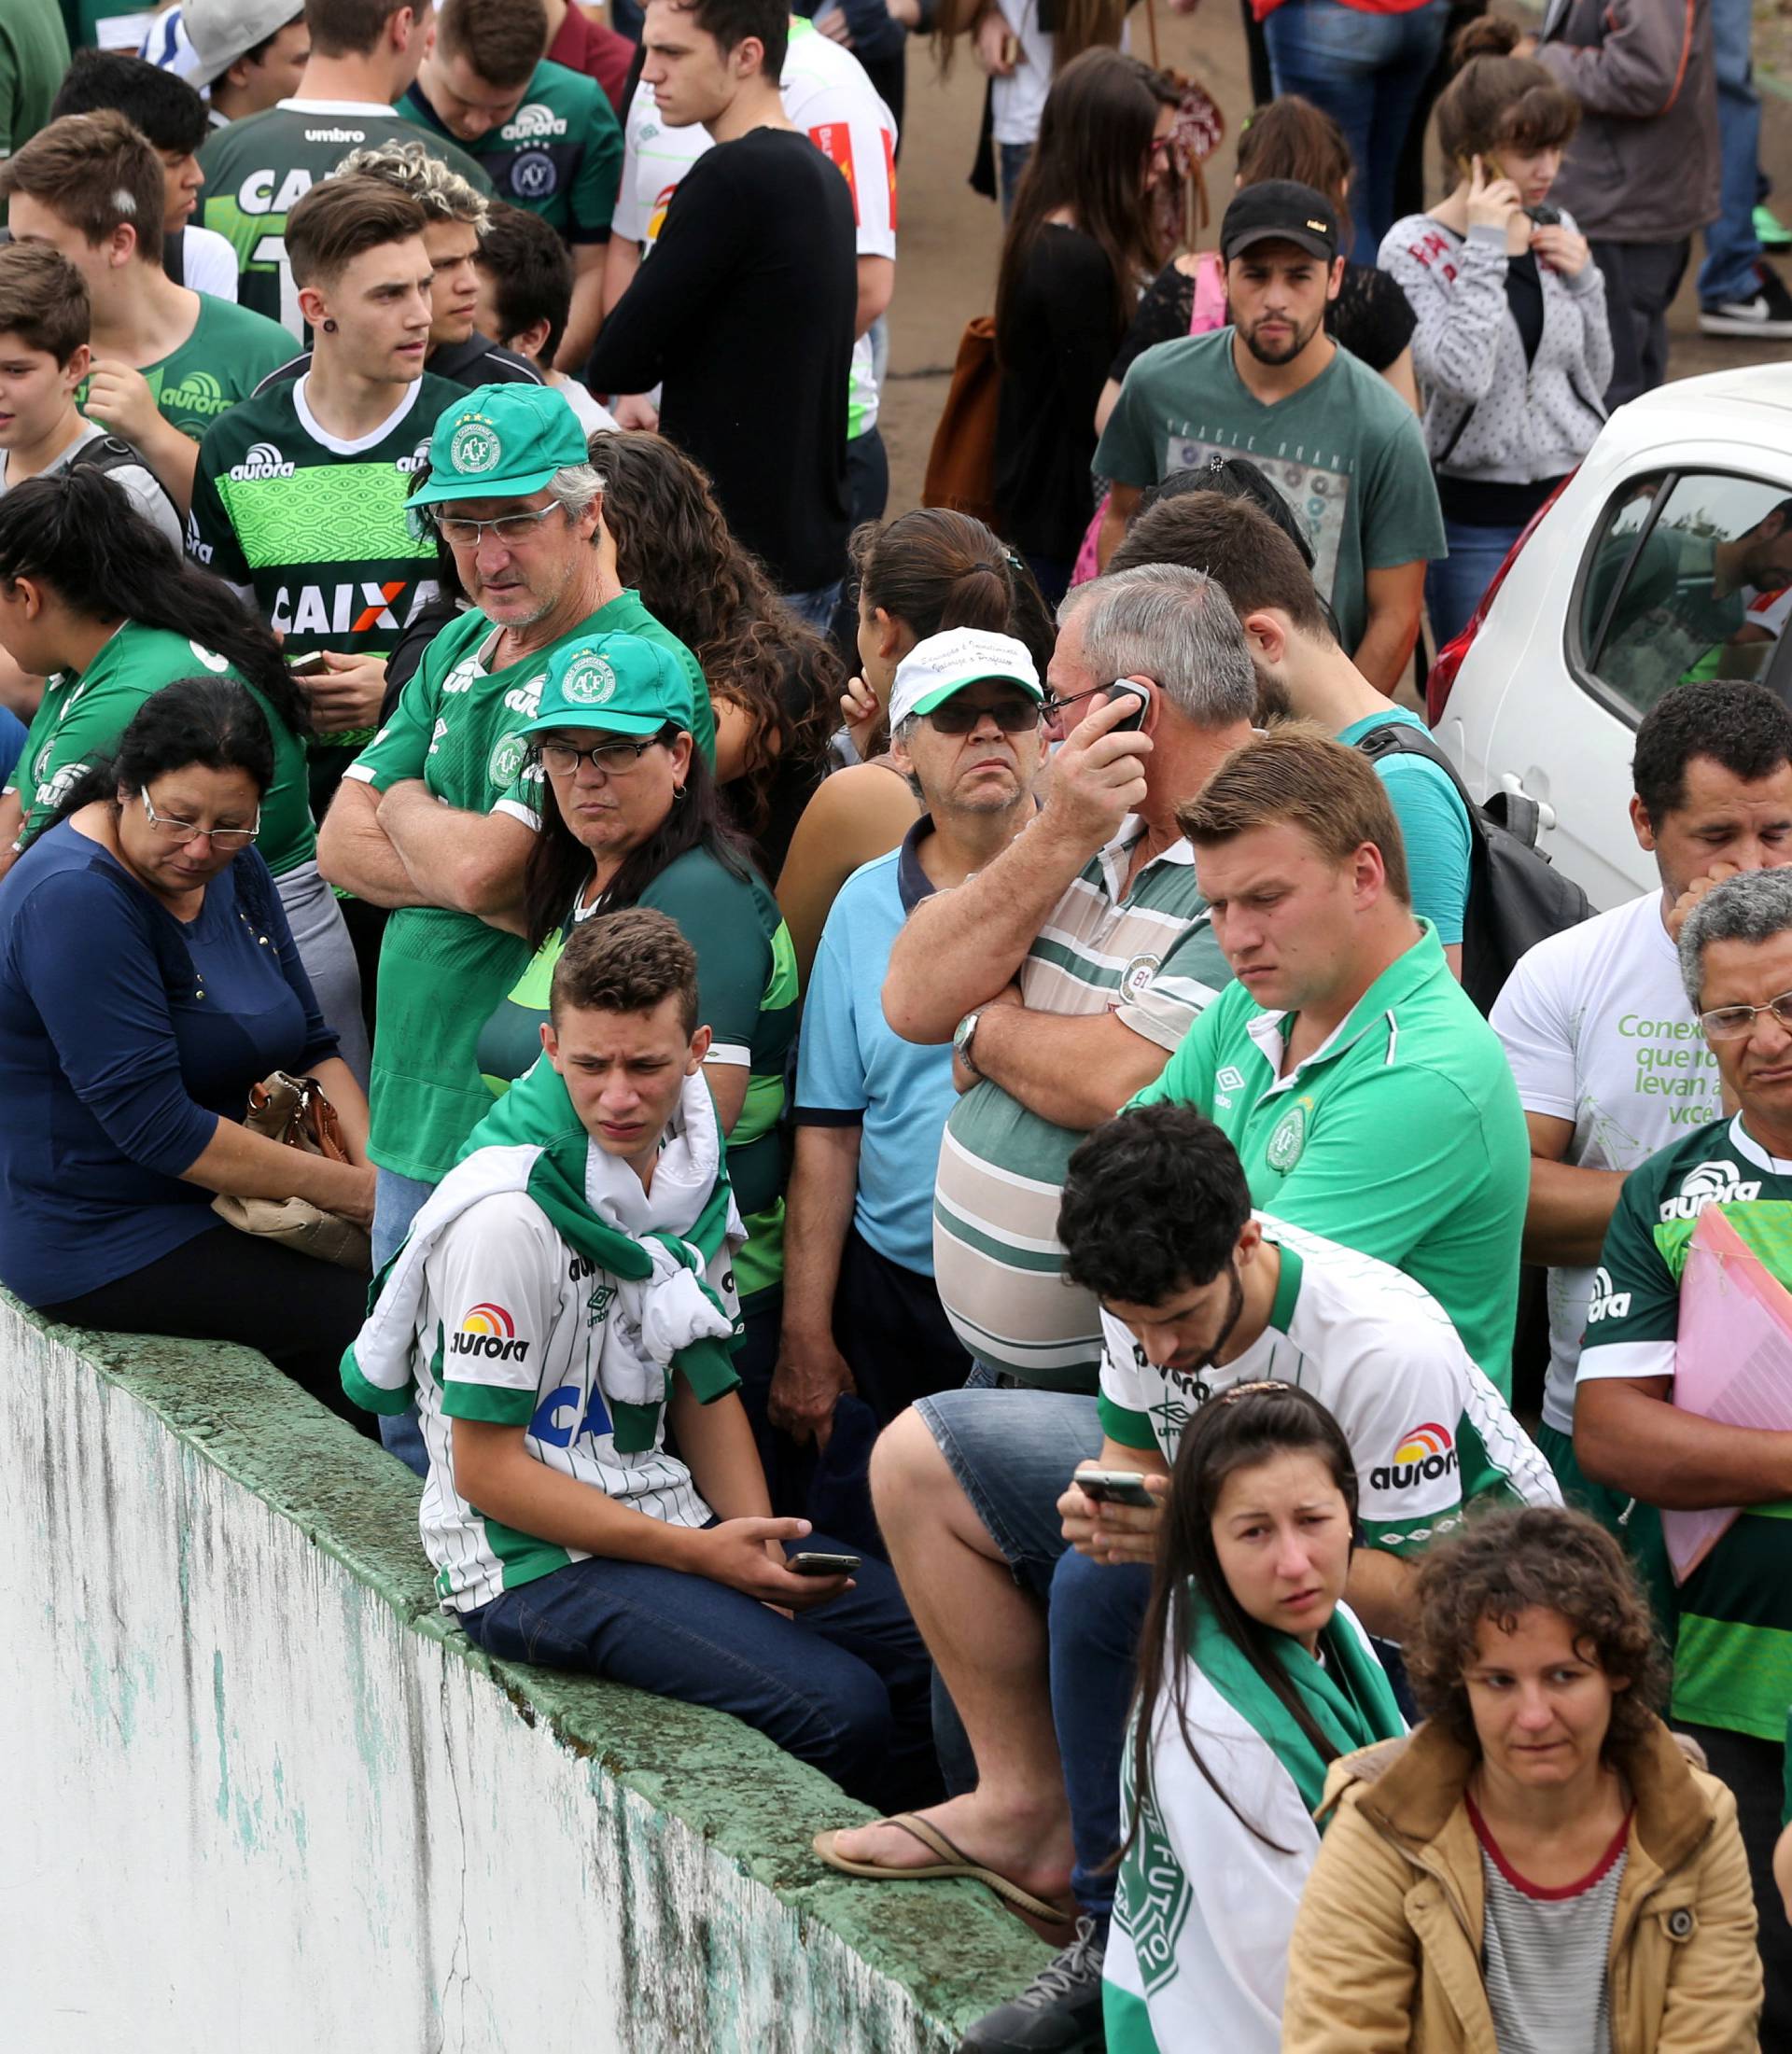 Fans of Chapecoense soccer team are pictured in front of the Arena Conda stadium in Chapeco